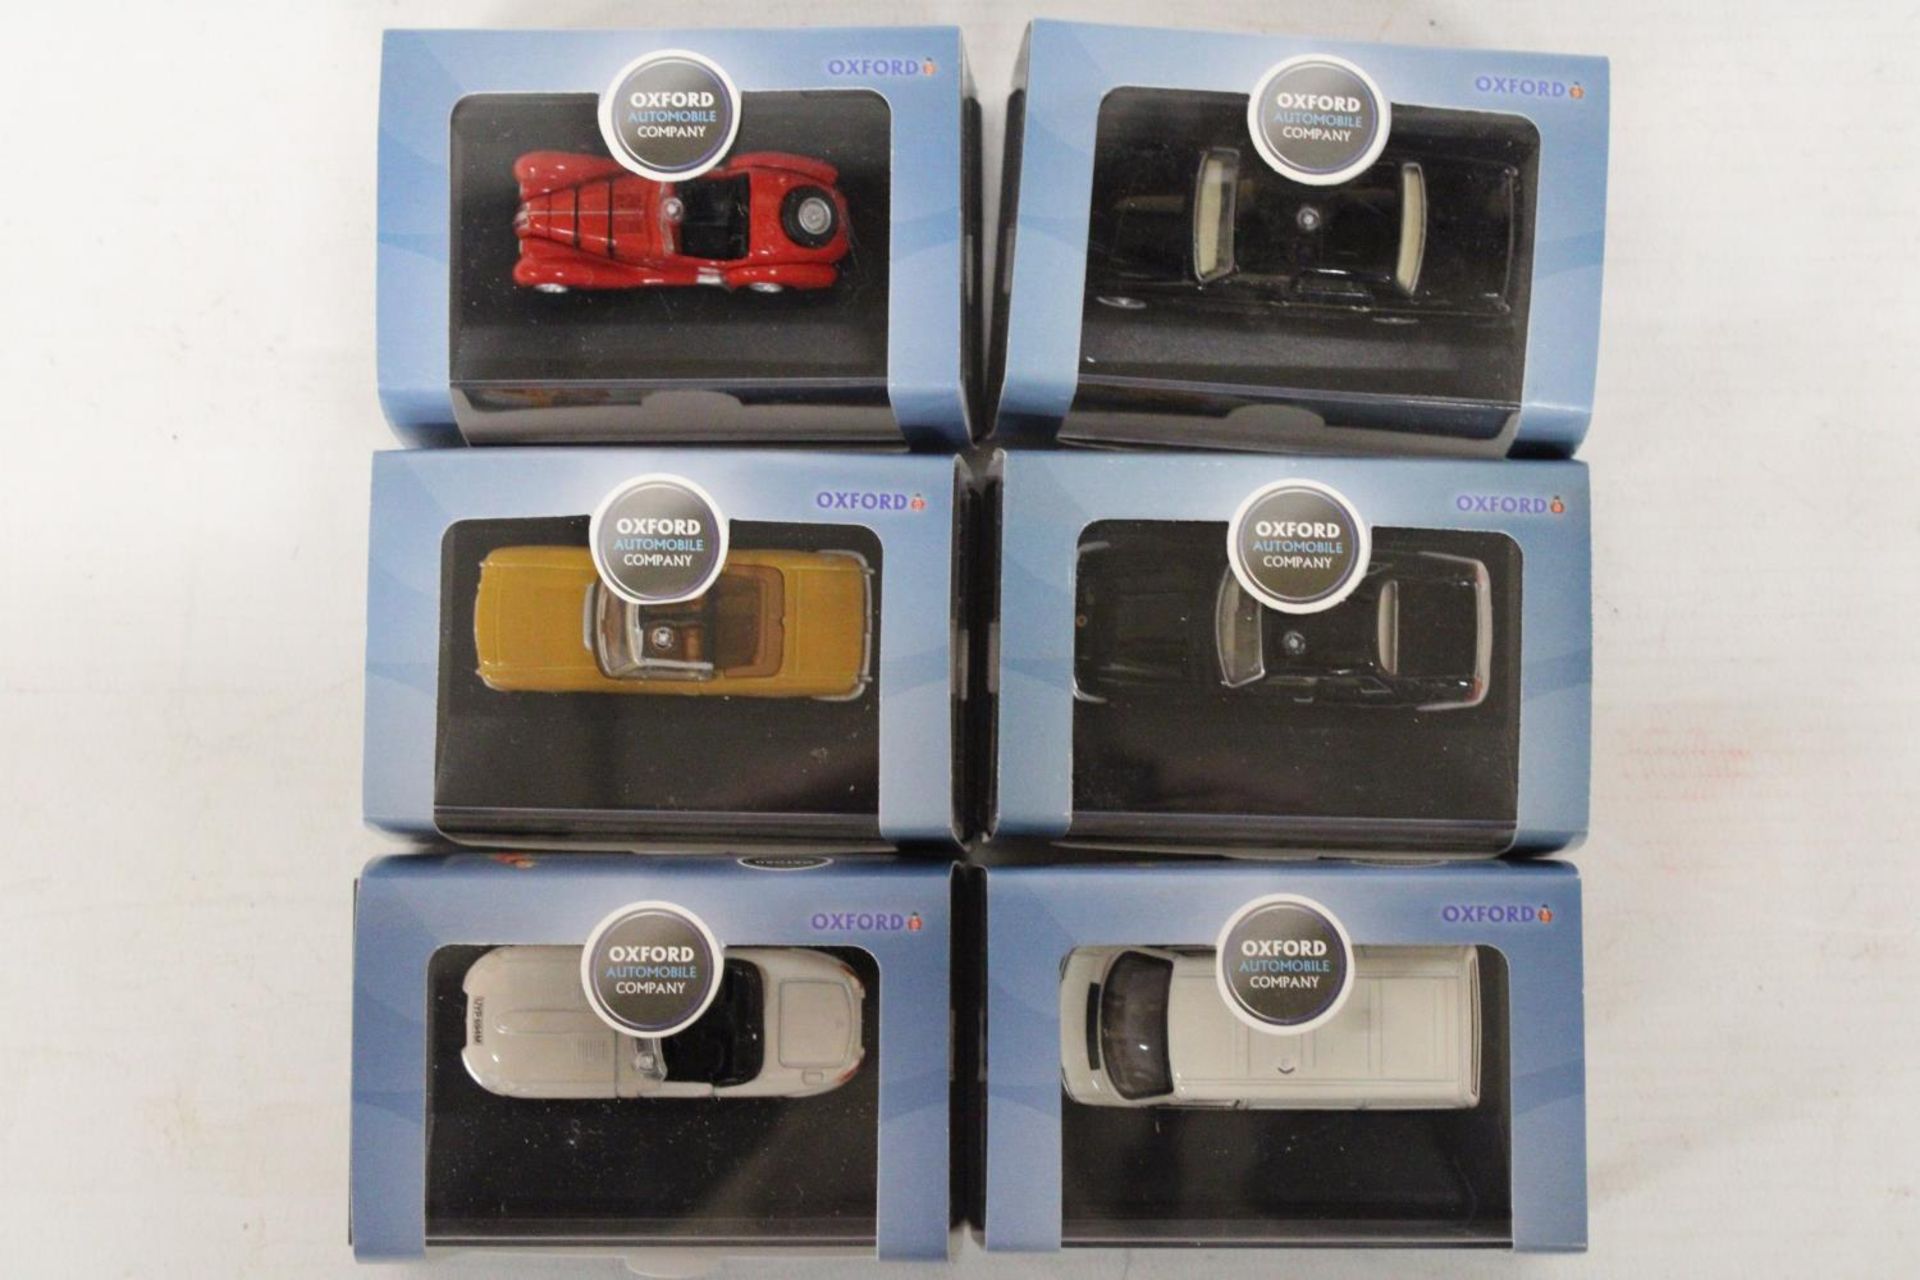 SIX VARIOUS AS NEW AND BOXED OXFORD AUTOMOBILE COMPANY VEHICLES - Image 6 of 8